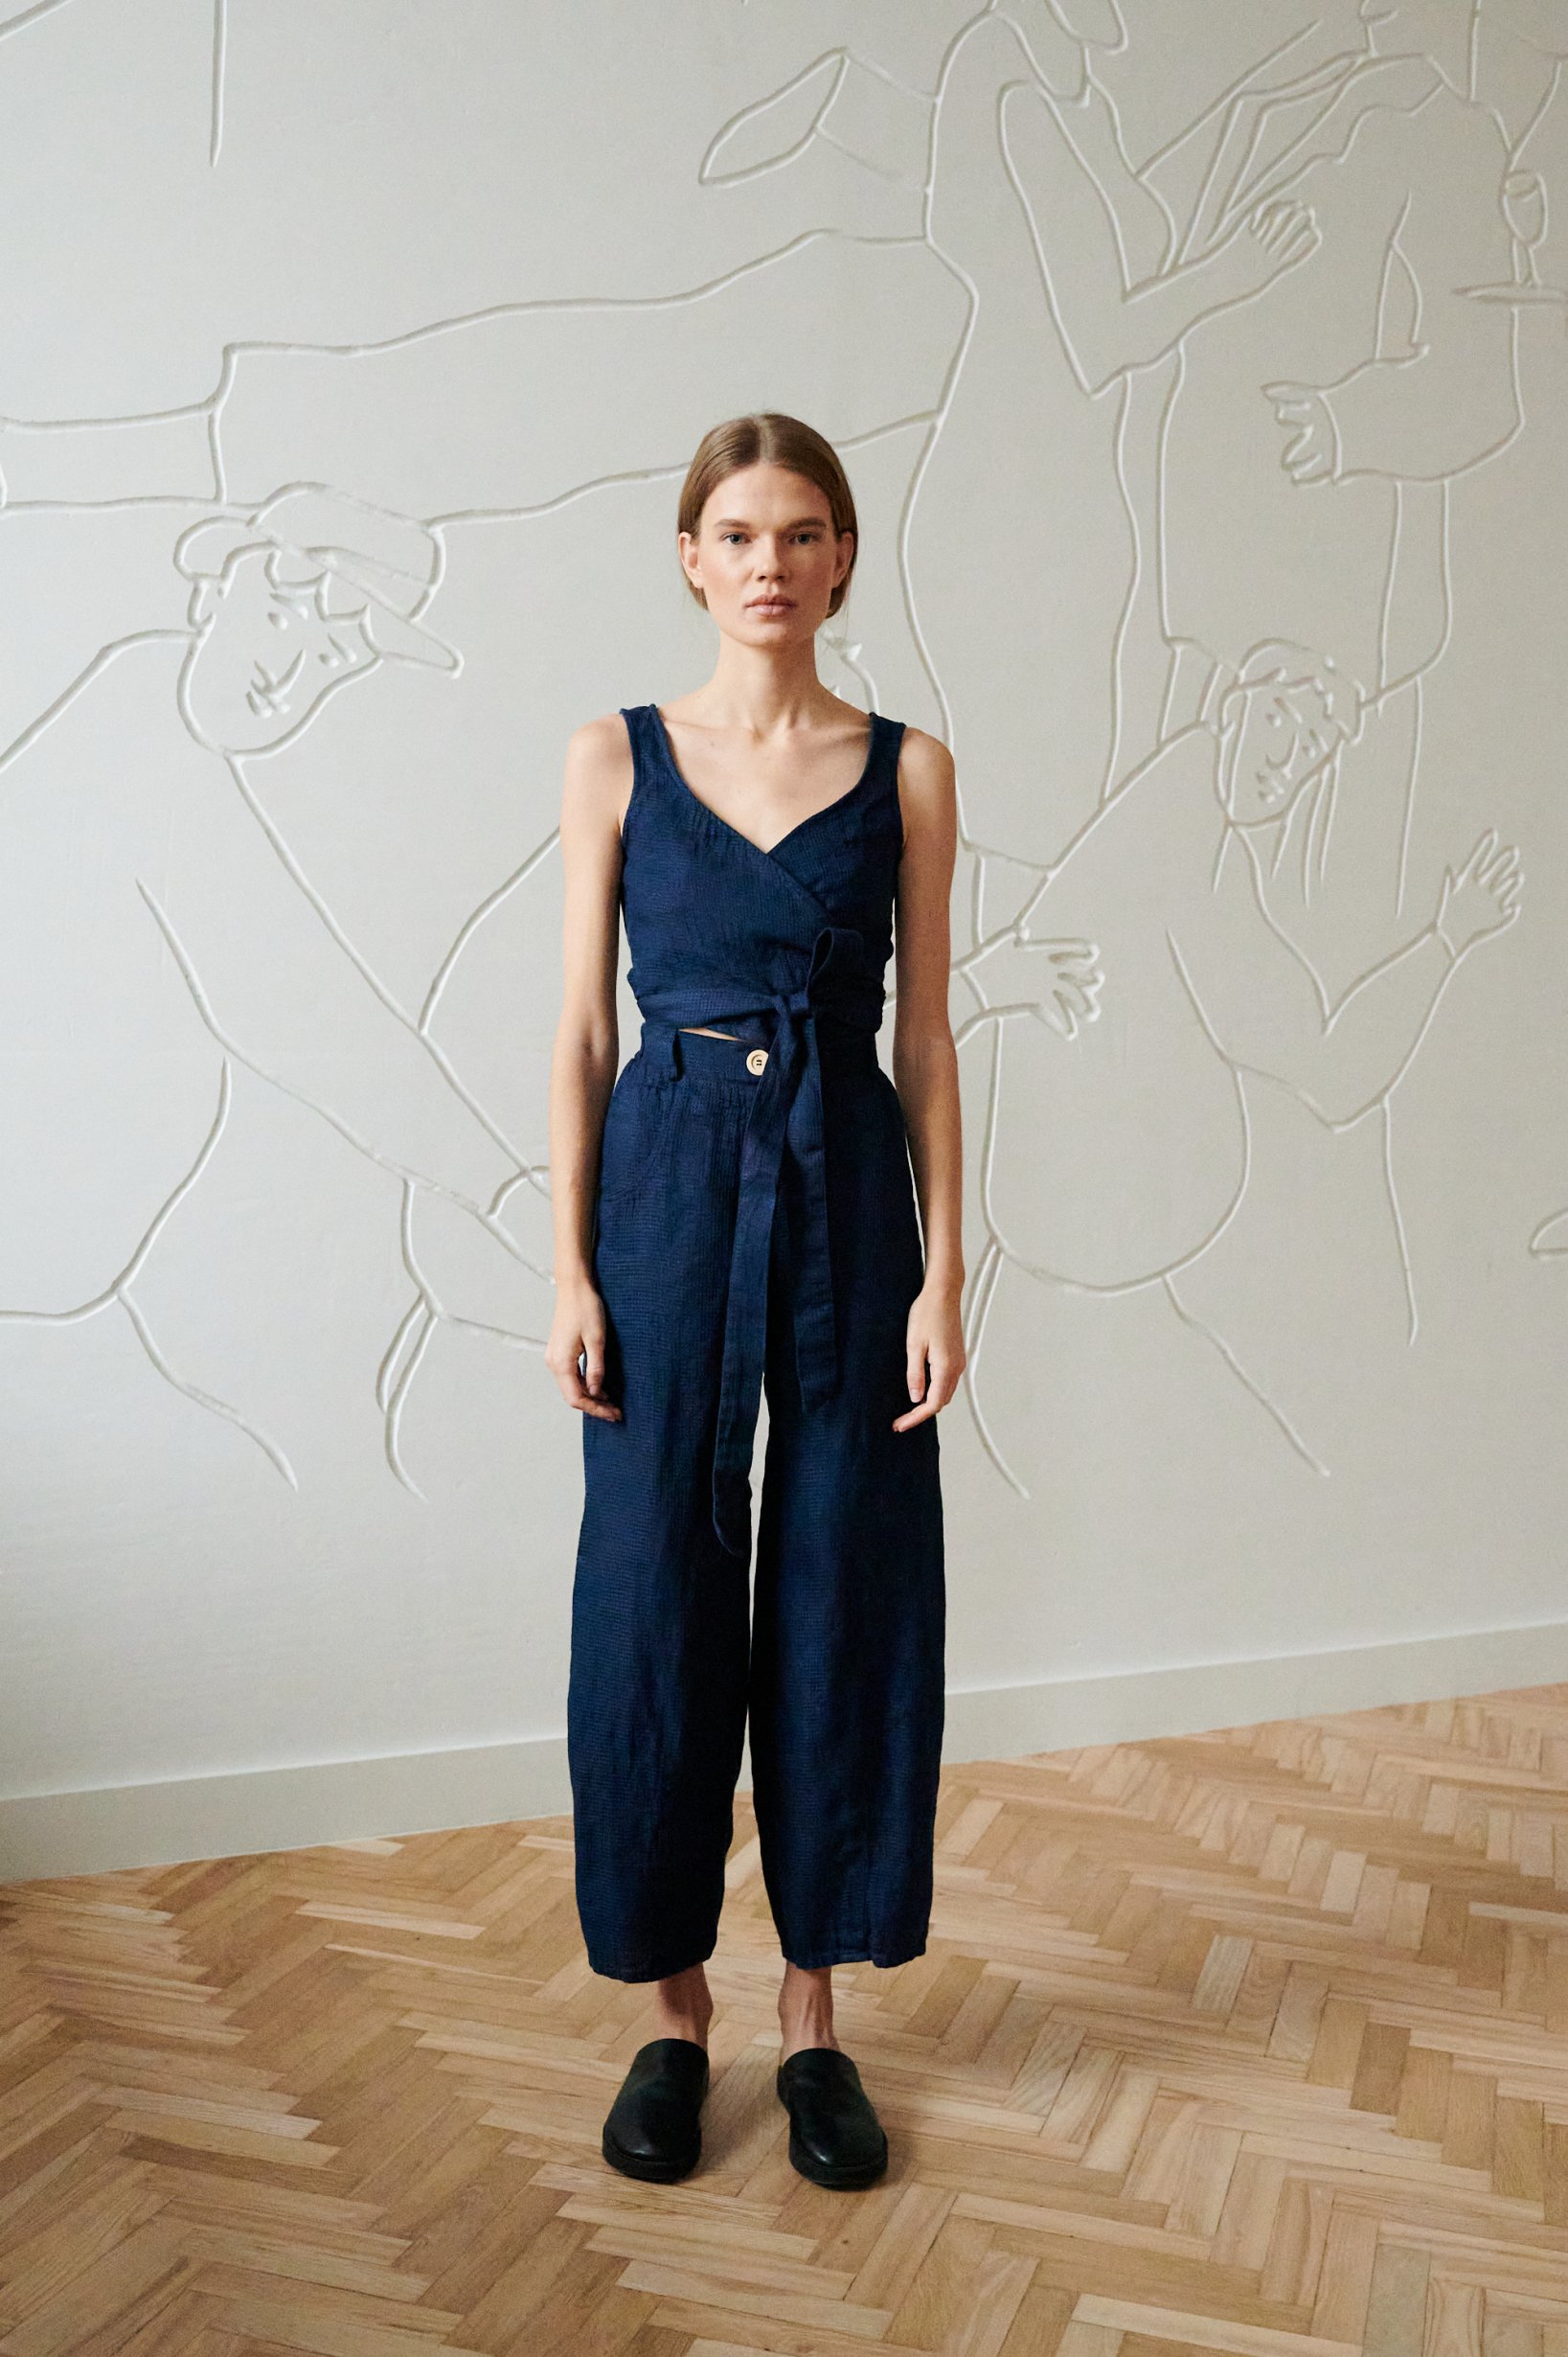 tapered linen trousers and a wrap top in dark navy